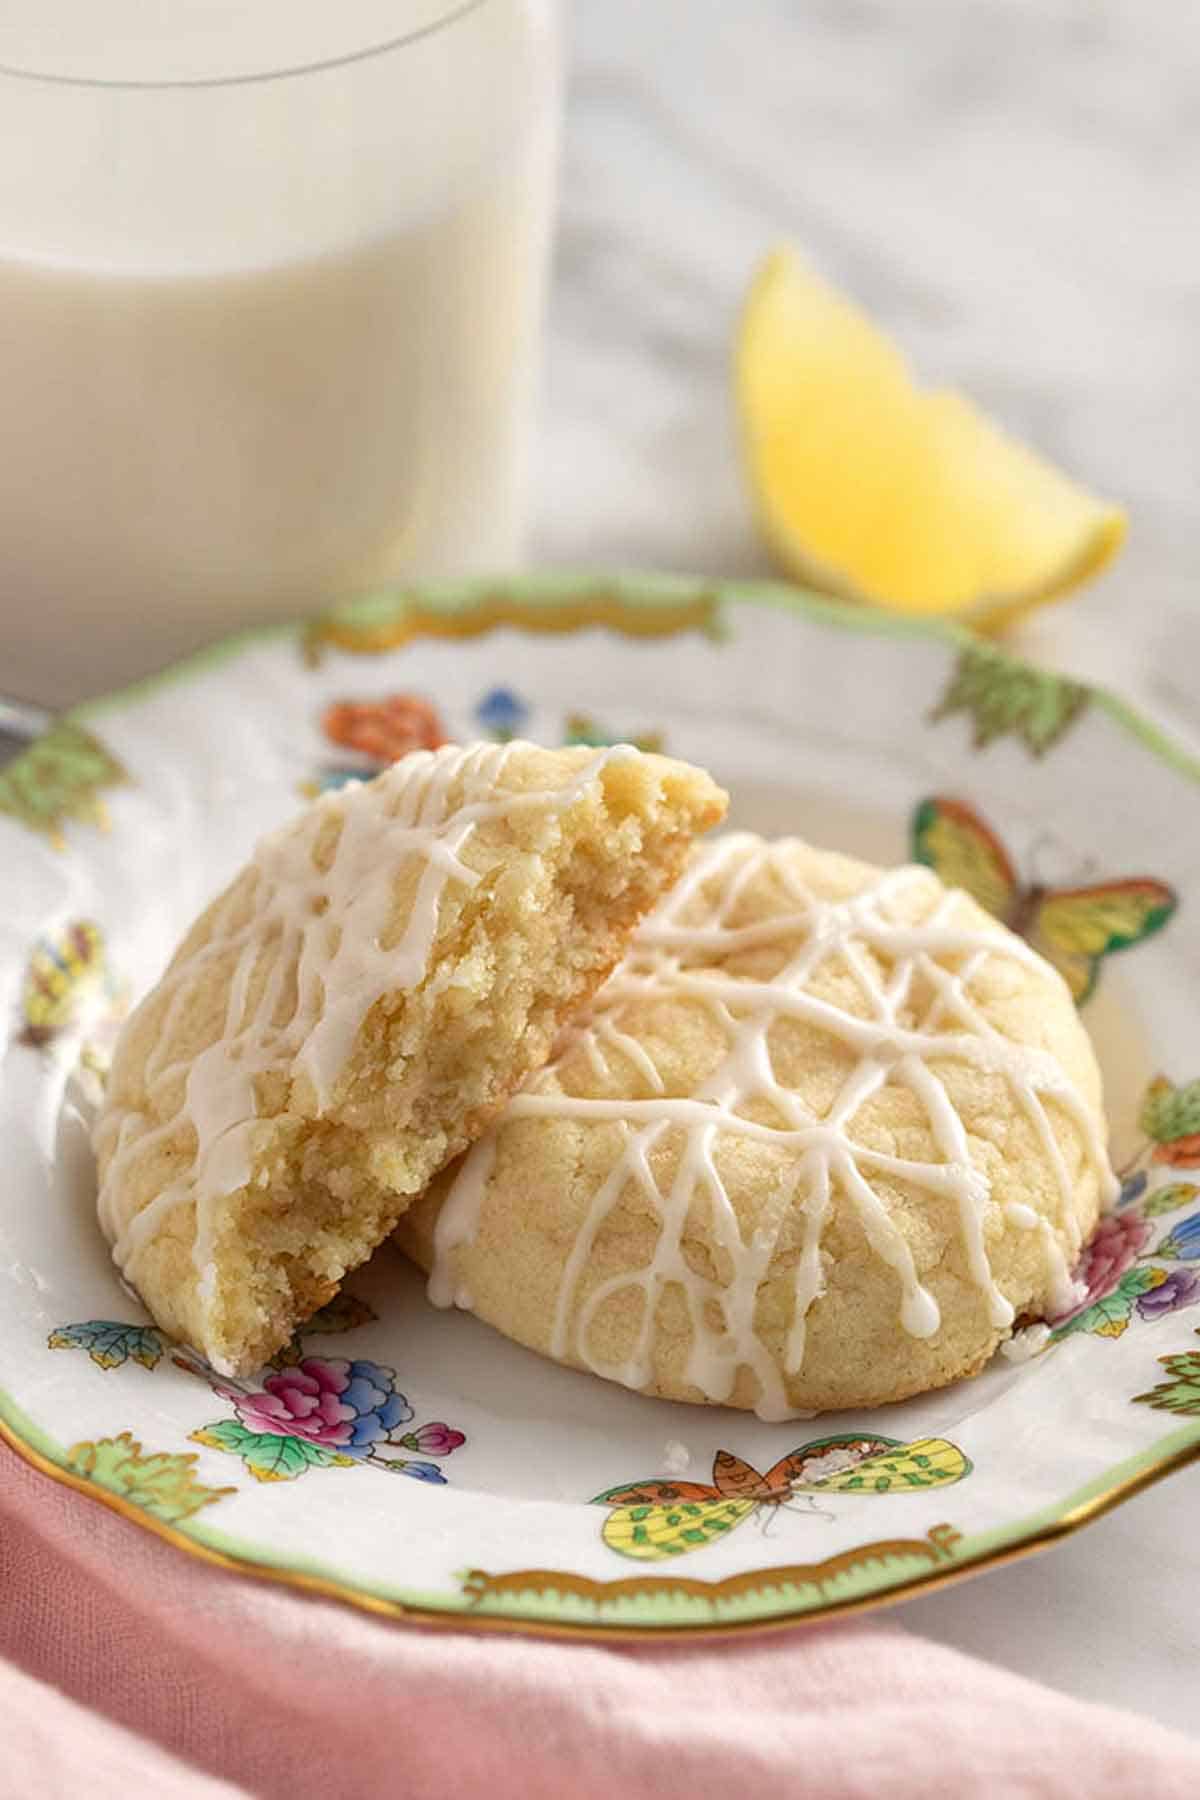 A plate with two lemon cookies, one cut in half. Lemon wedge and glass of milk in the background.